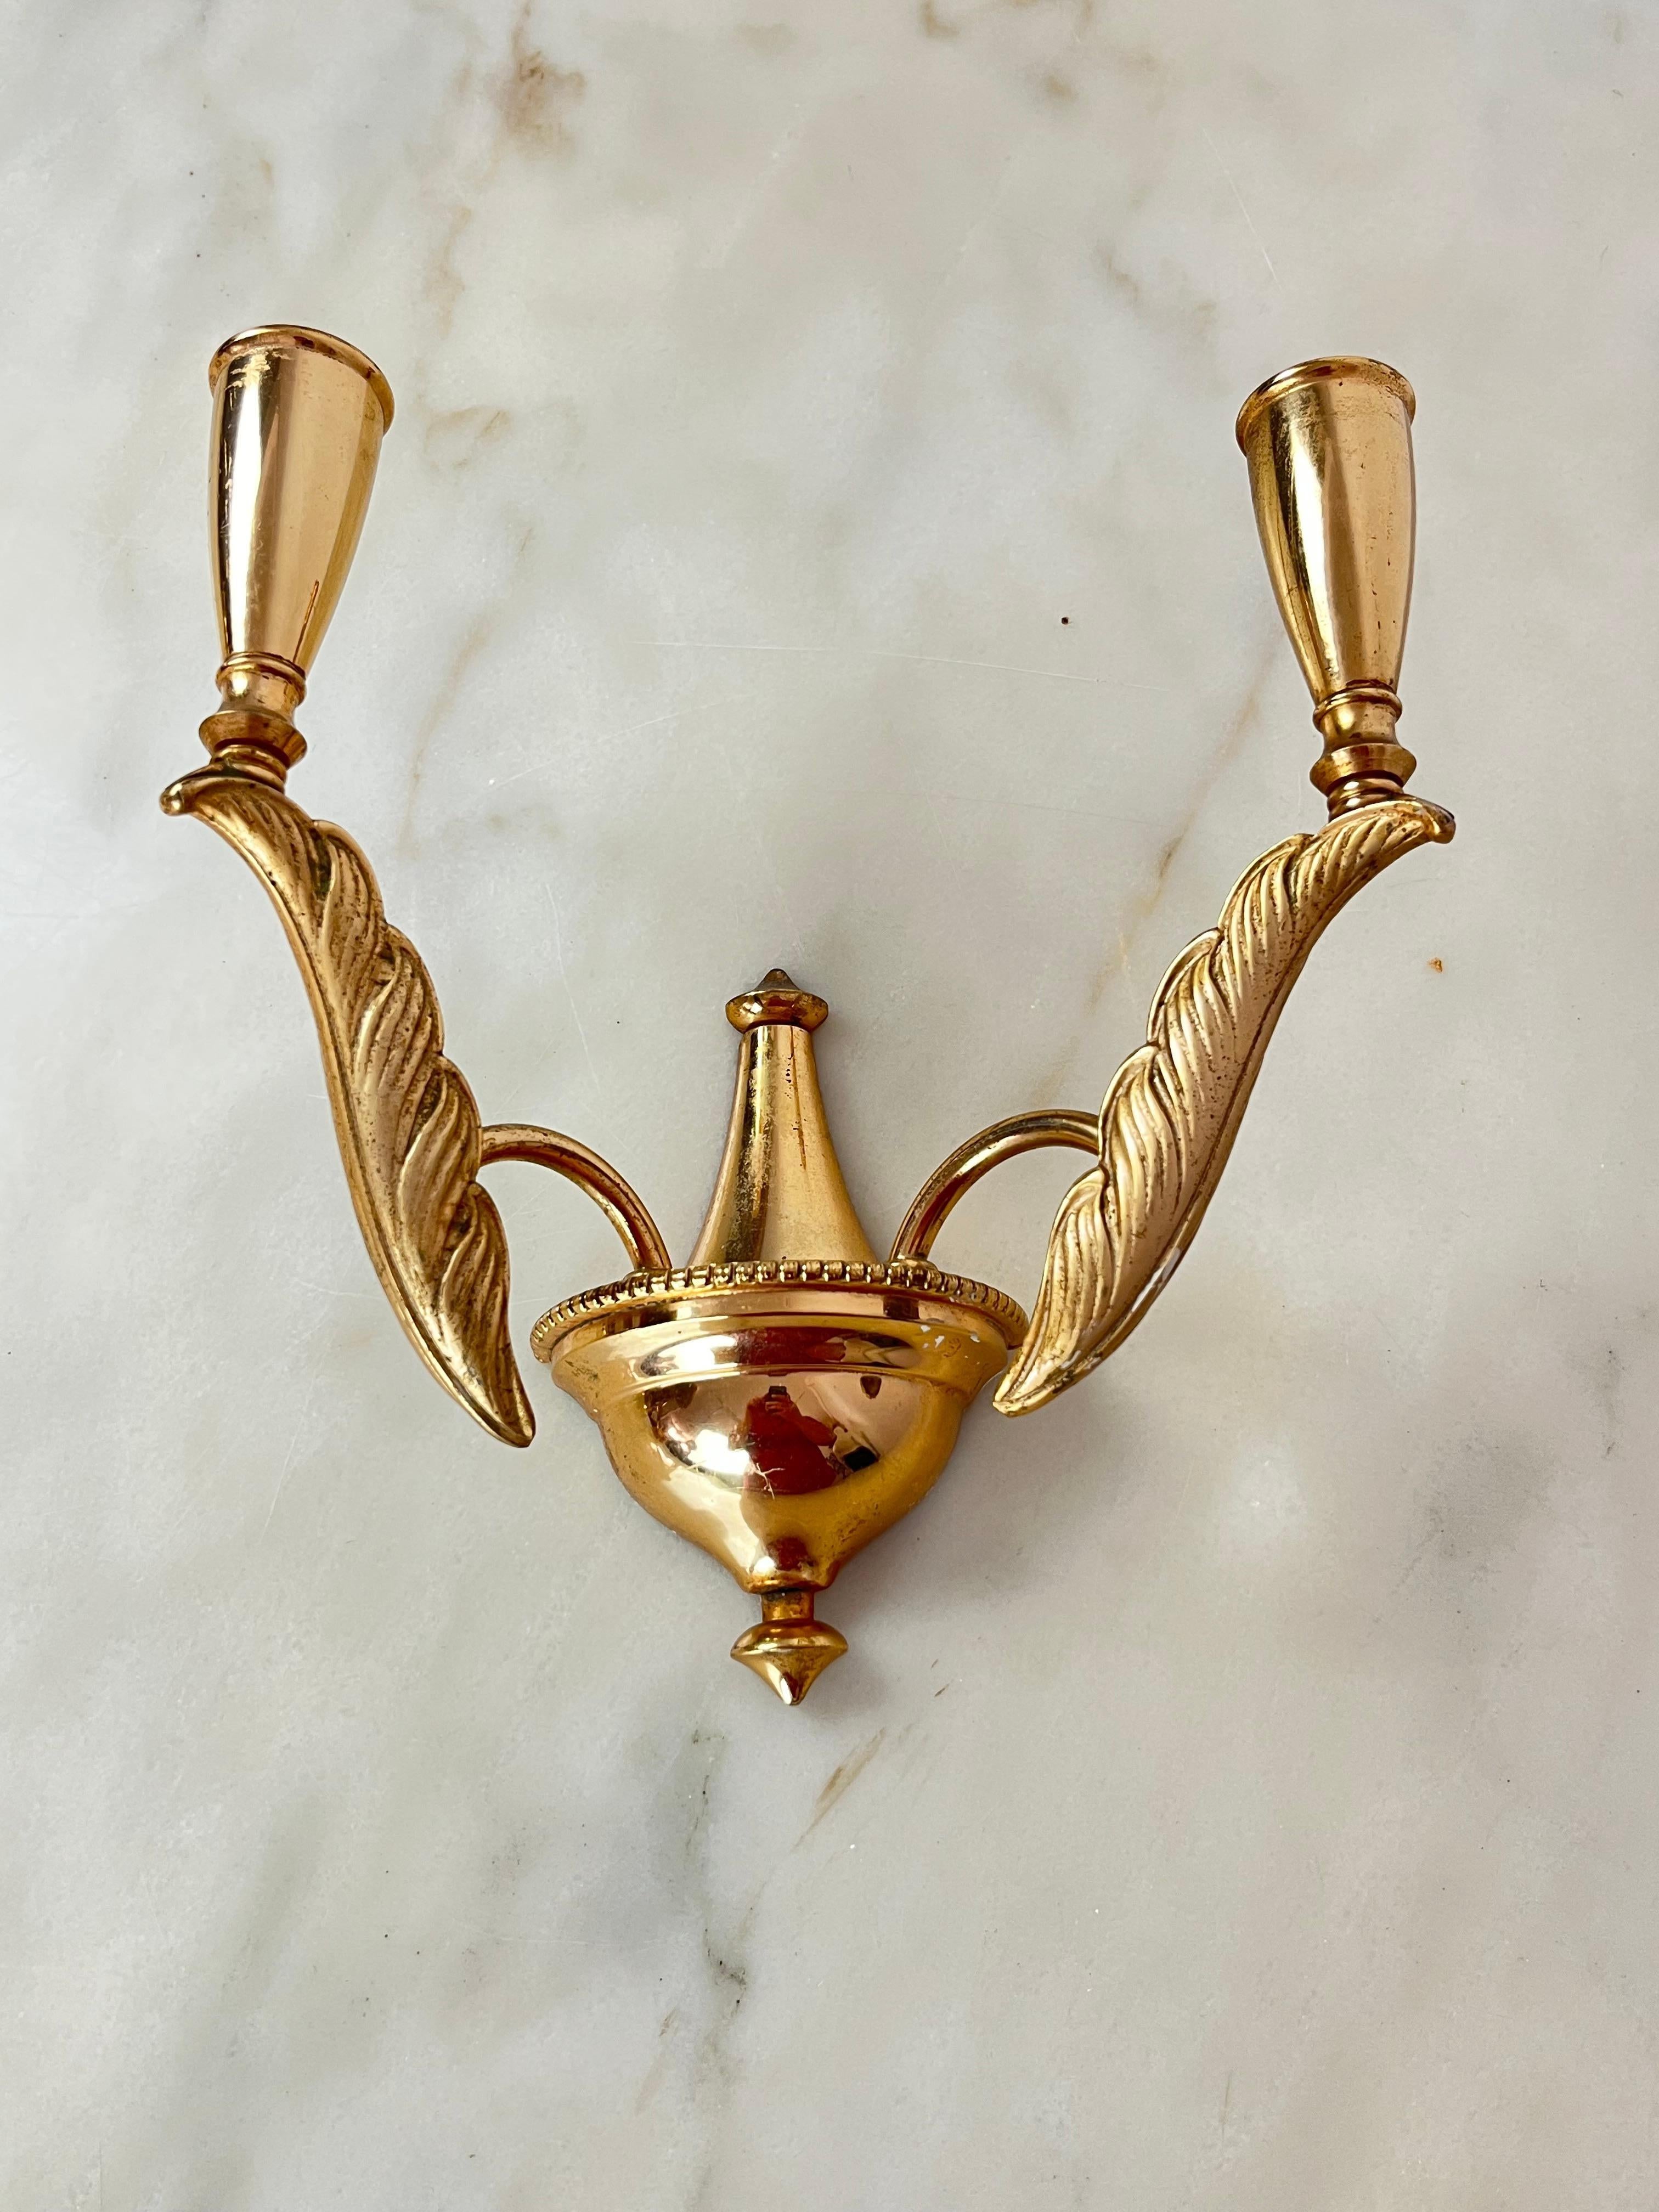 Set of 4 brass Wall Lamp/Sconces, Italy, 1960s.
Intact and functioning, small signs of aging,

We guarantee adequate packaging and will ship via DHL, insuring the contents against any breakage or loss of the package.